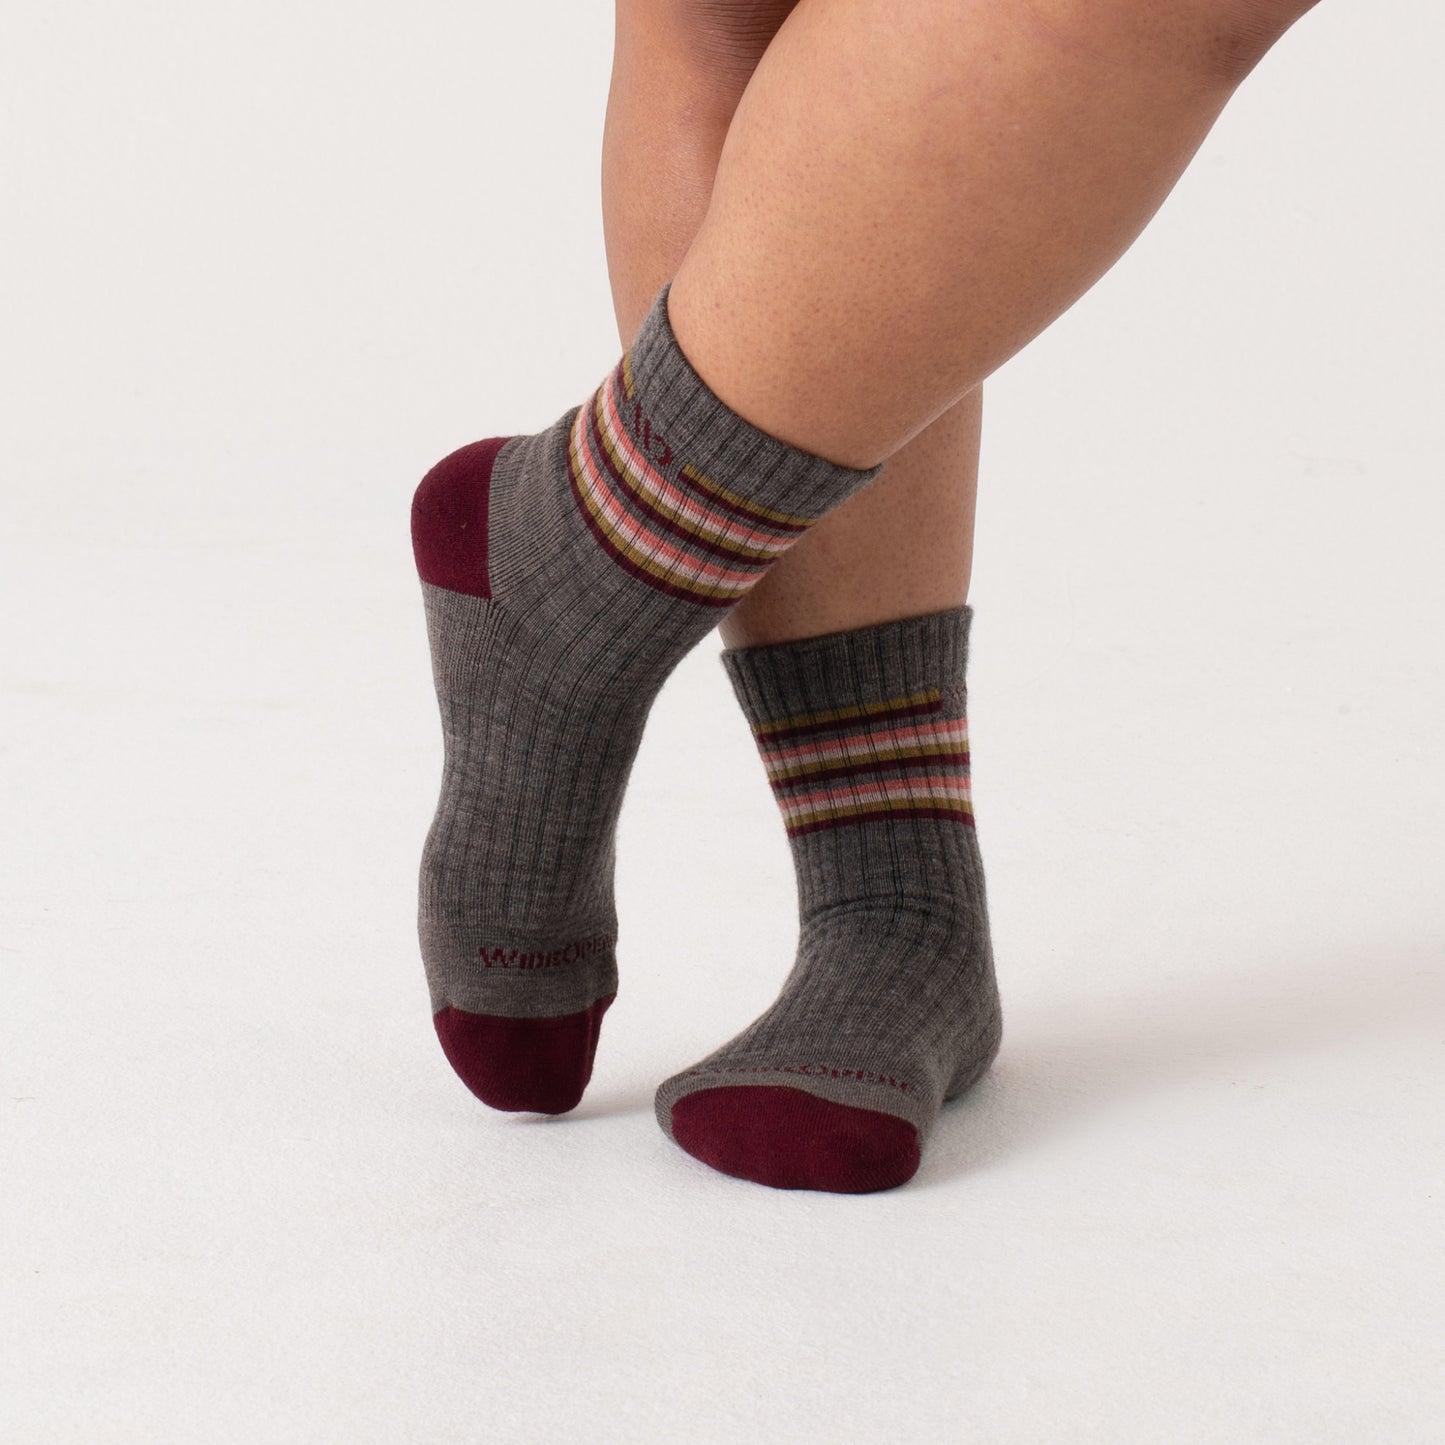 On model Micro Crews: maroon heel/toe, taupe body with Stripes below the cuff --Taupe